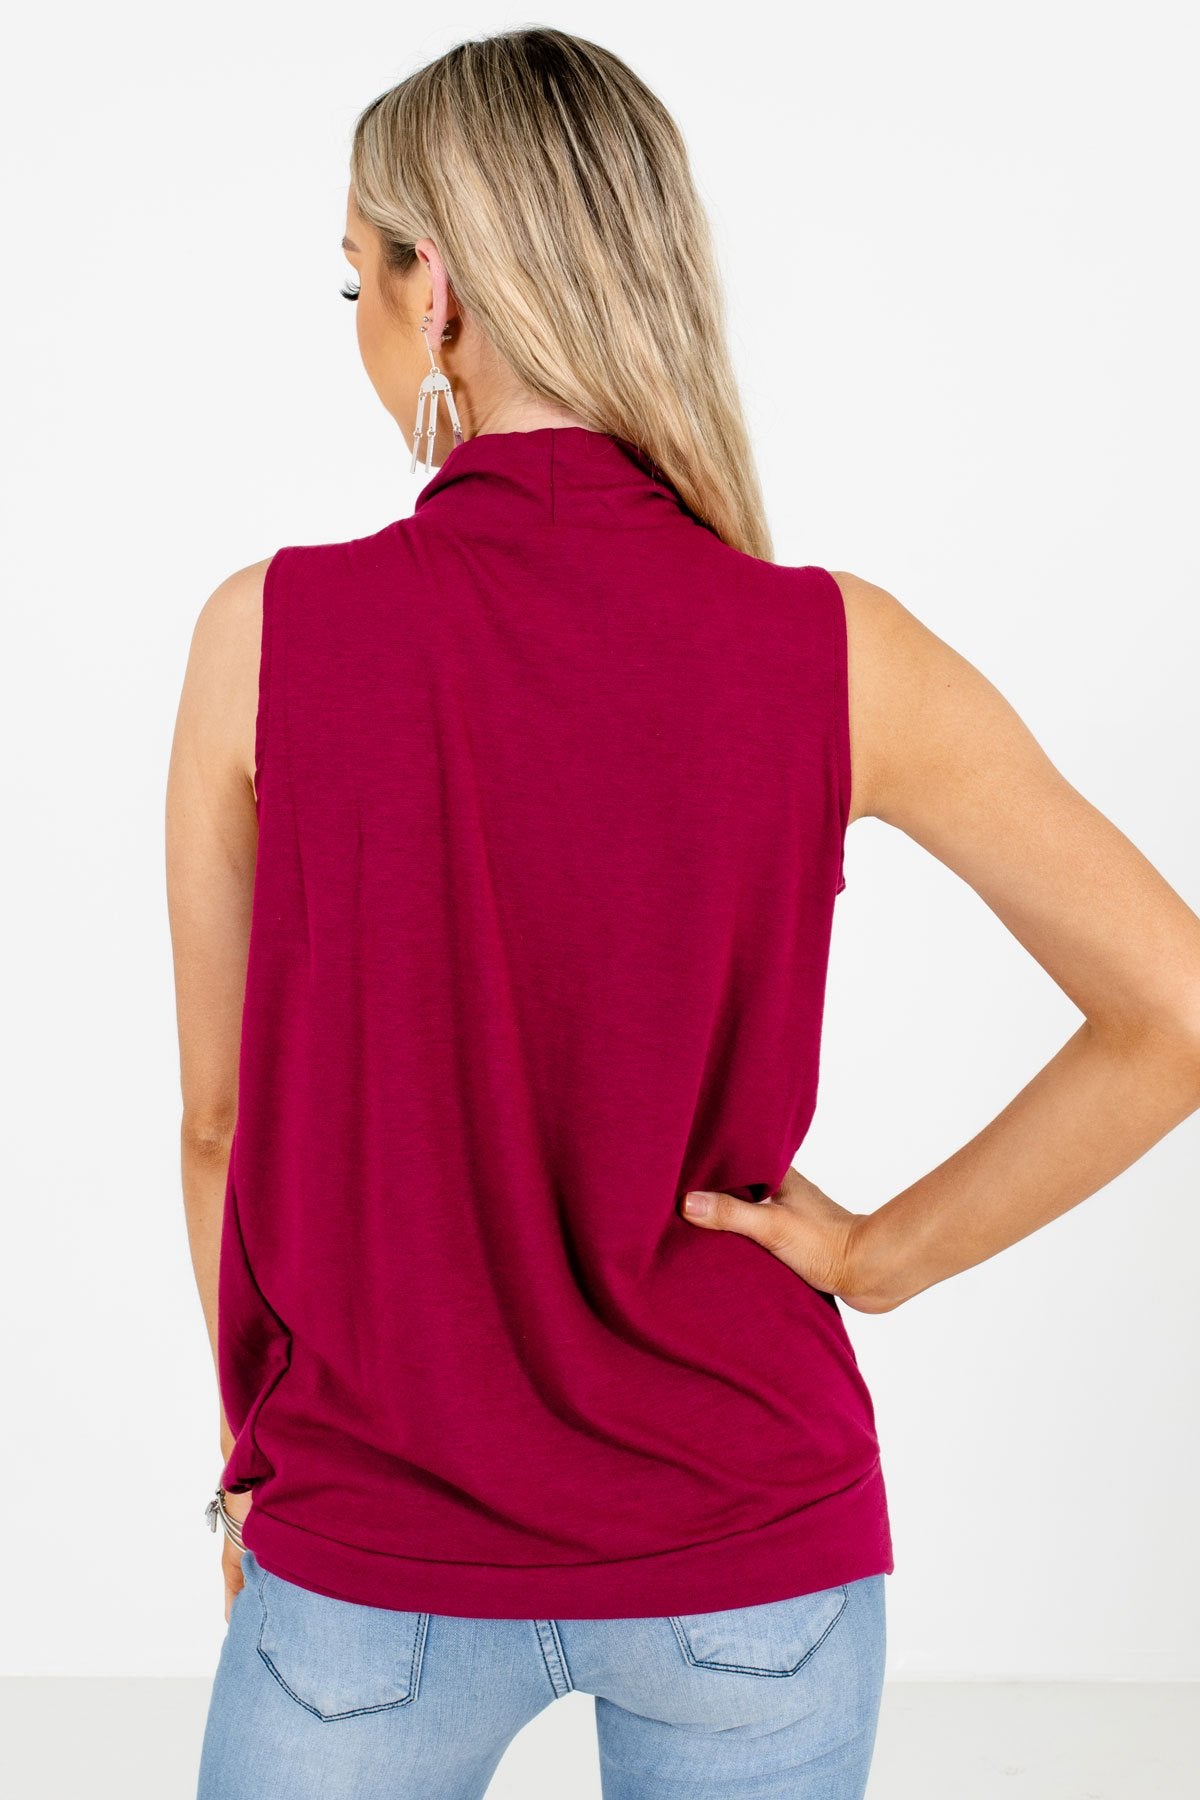 Women’s Wine Red Pleated Detailed Boutique Tank Top